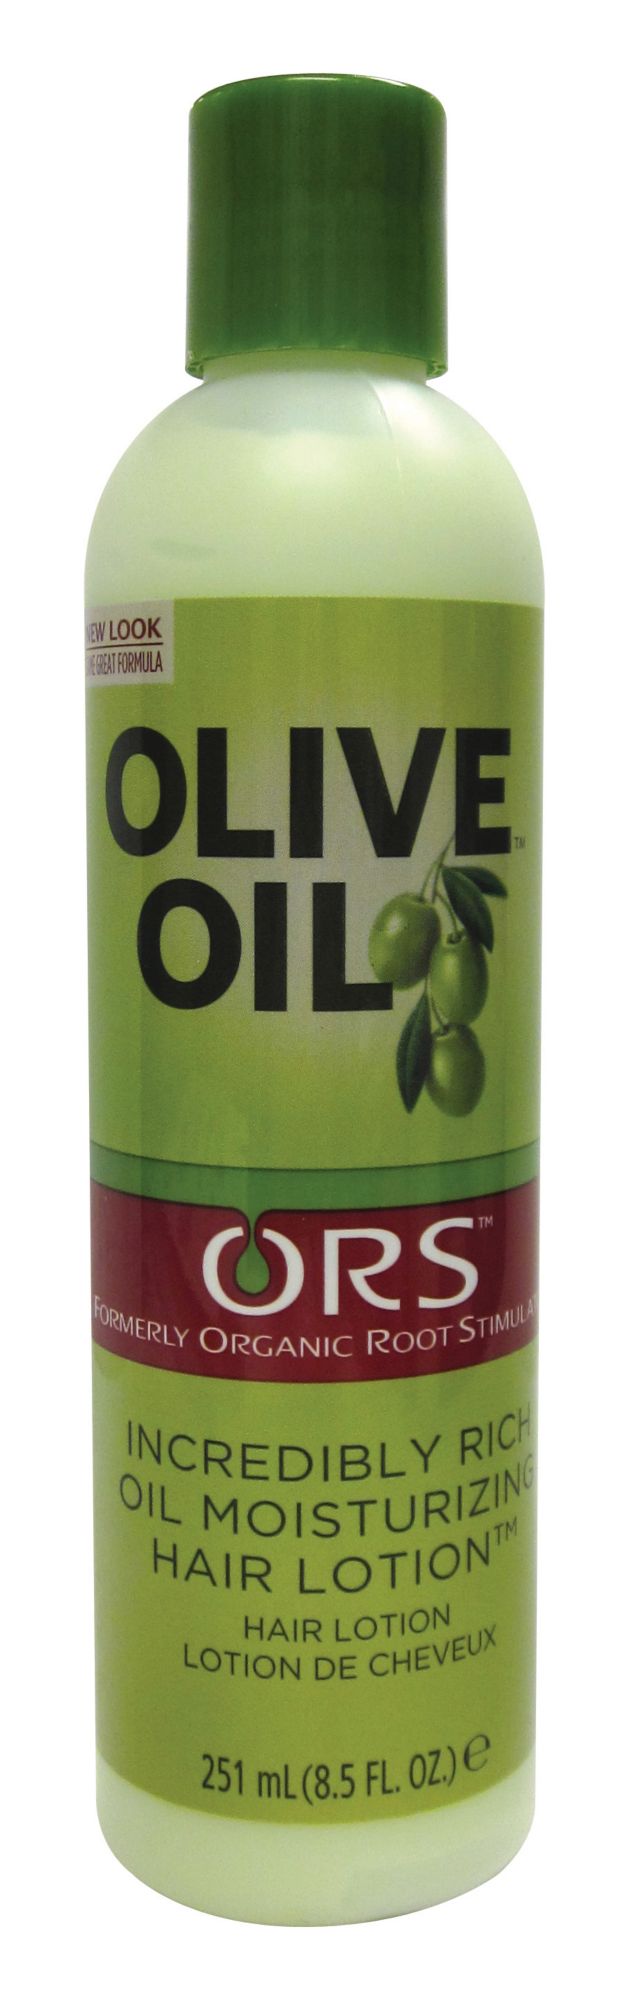 4th Ave Market: Organic Root Stimulator Olive Oil Incredibly Rich Oil  Moisturizing Hair Lotion, 23 Ounce